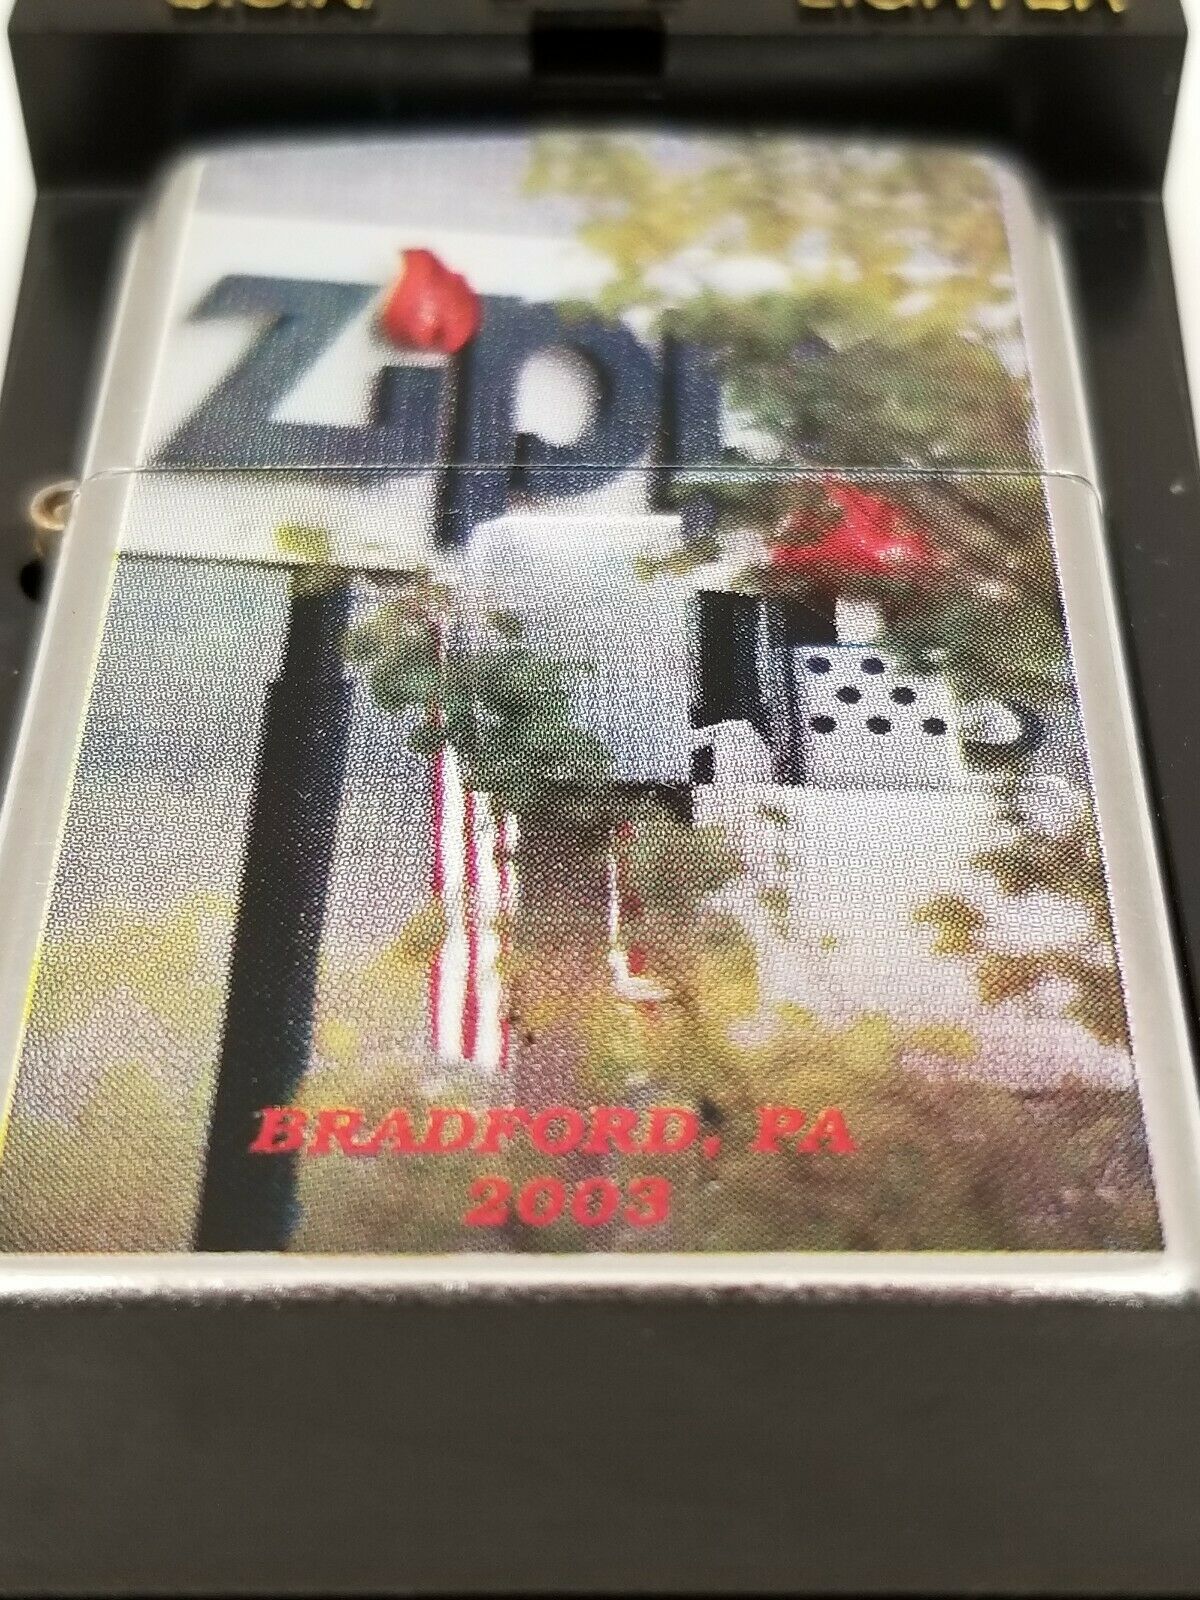 Flame The Main Zippo lighter 2003 mib with paperwork and sticker. #109/500